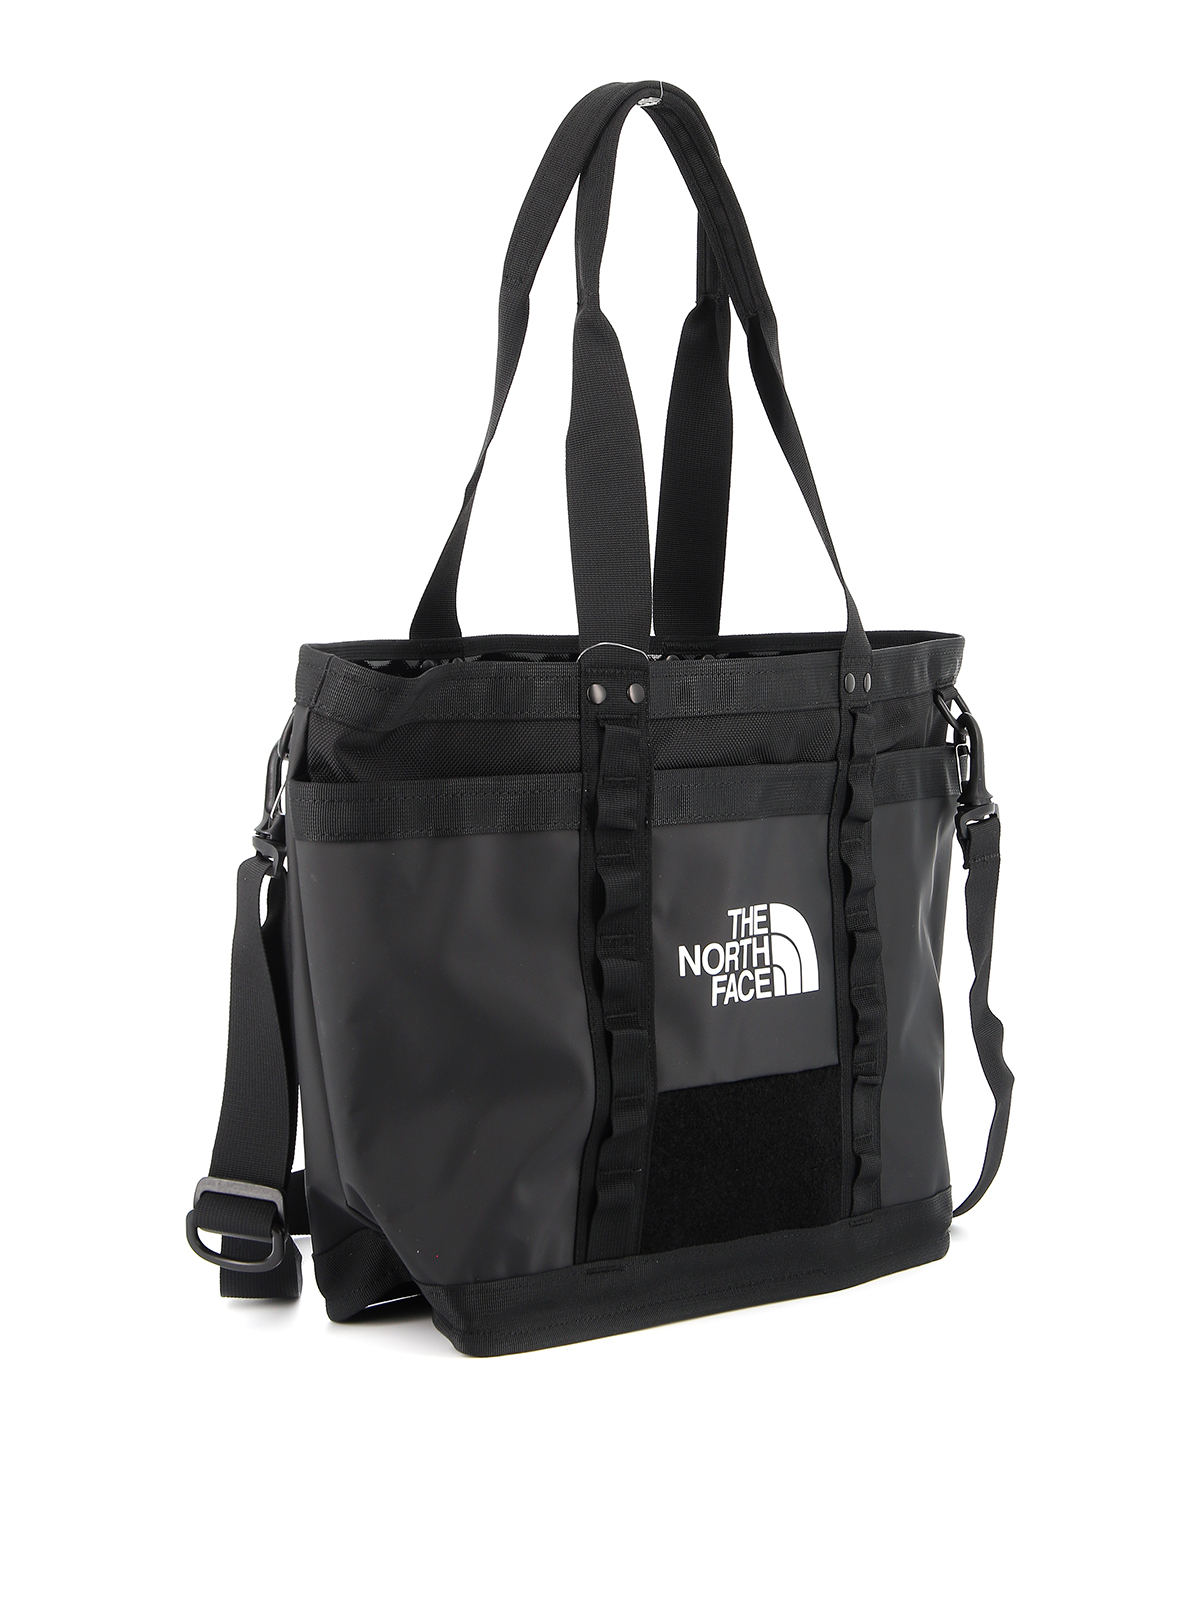 The North Face - Explore Utility fabric tote - totes bags - NF0A3KYJKX7